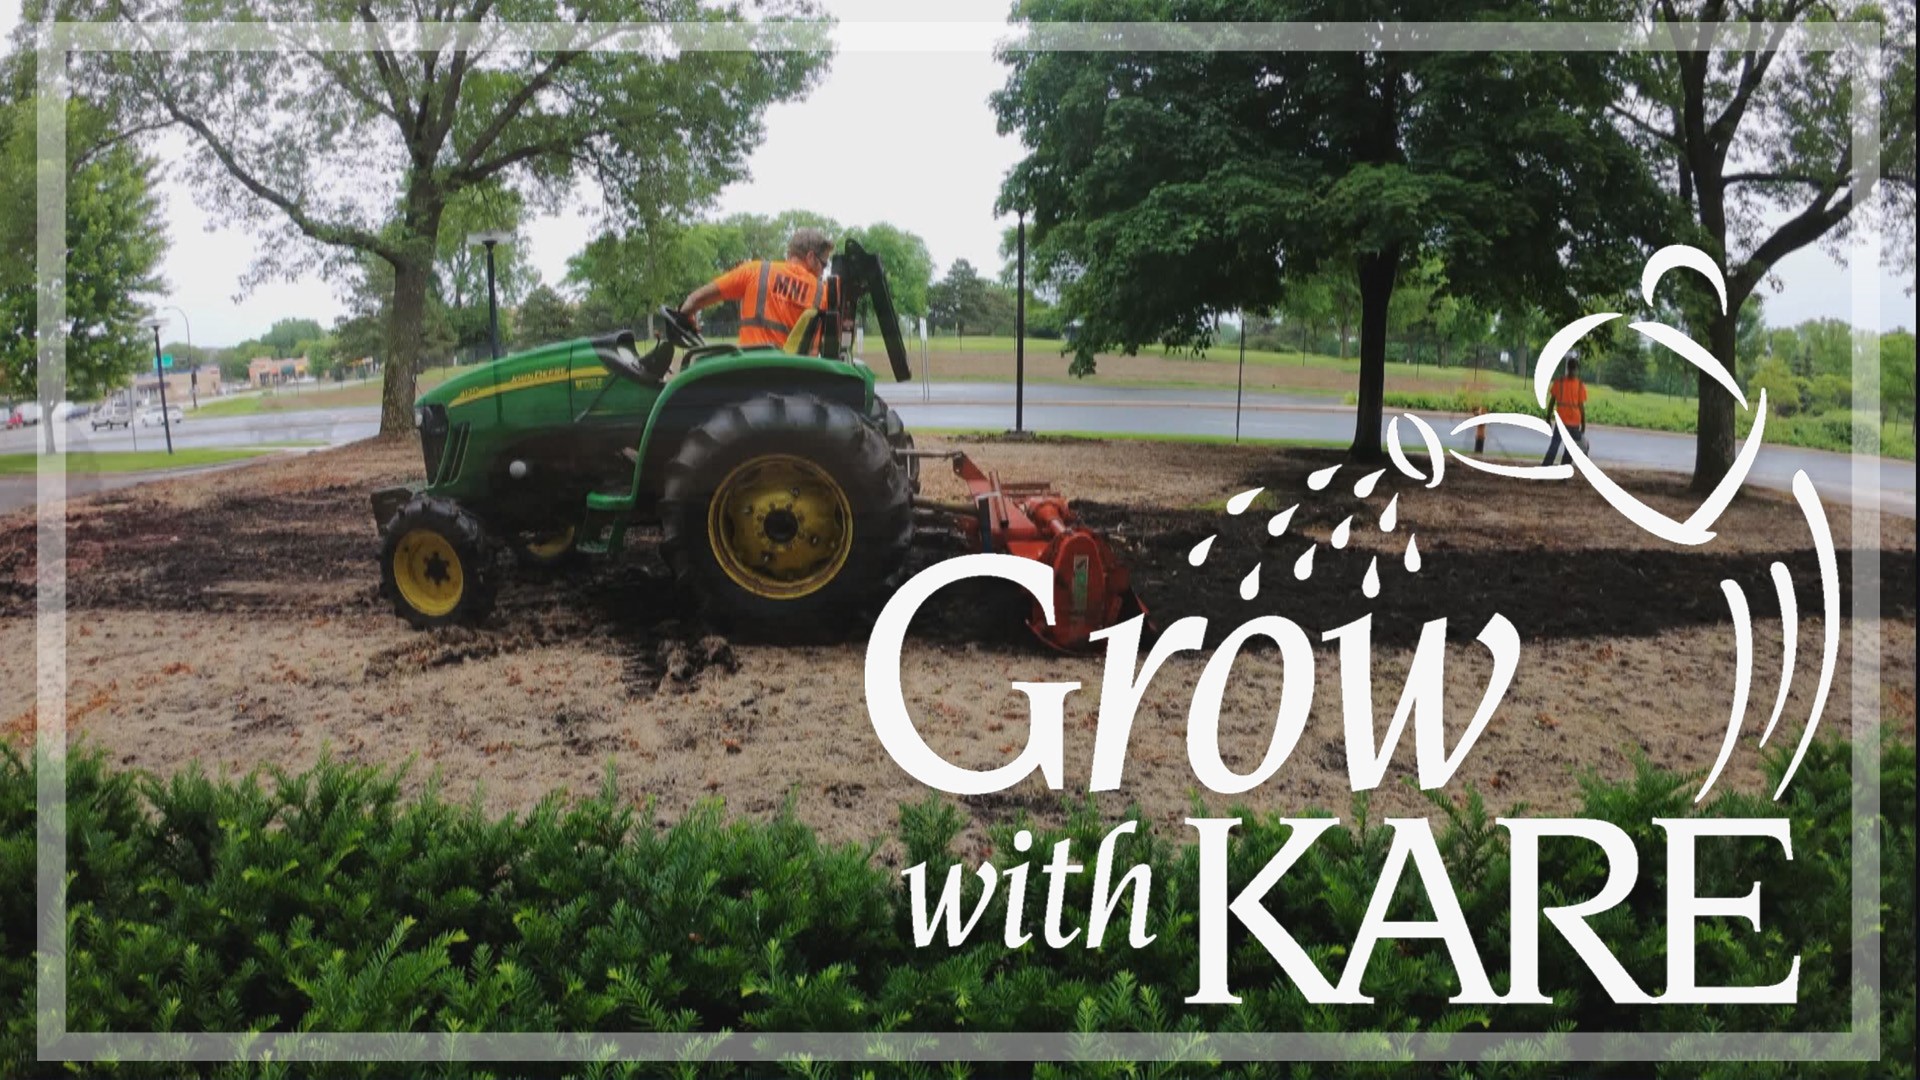 Some of you have been asking how the front yard prairie is doing at our KARE 11 studio, and there are certainly some updates to tell you about!